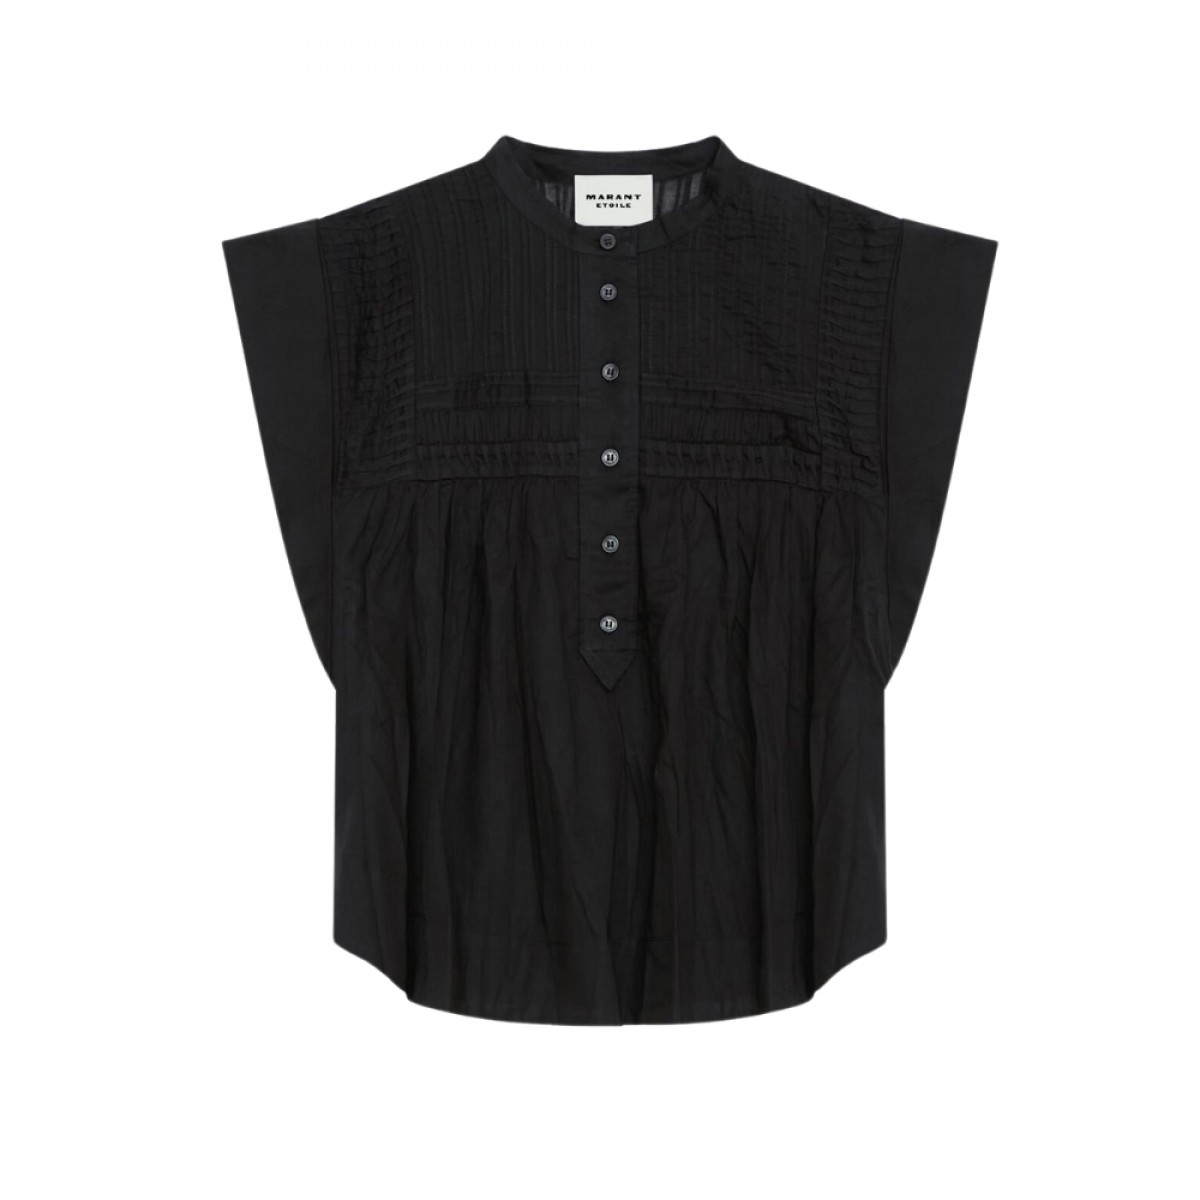 leaza top - black - front